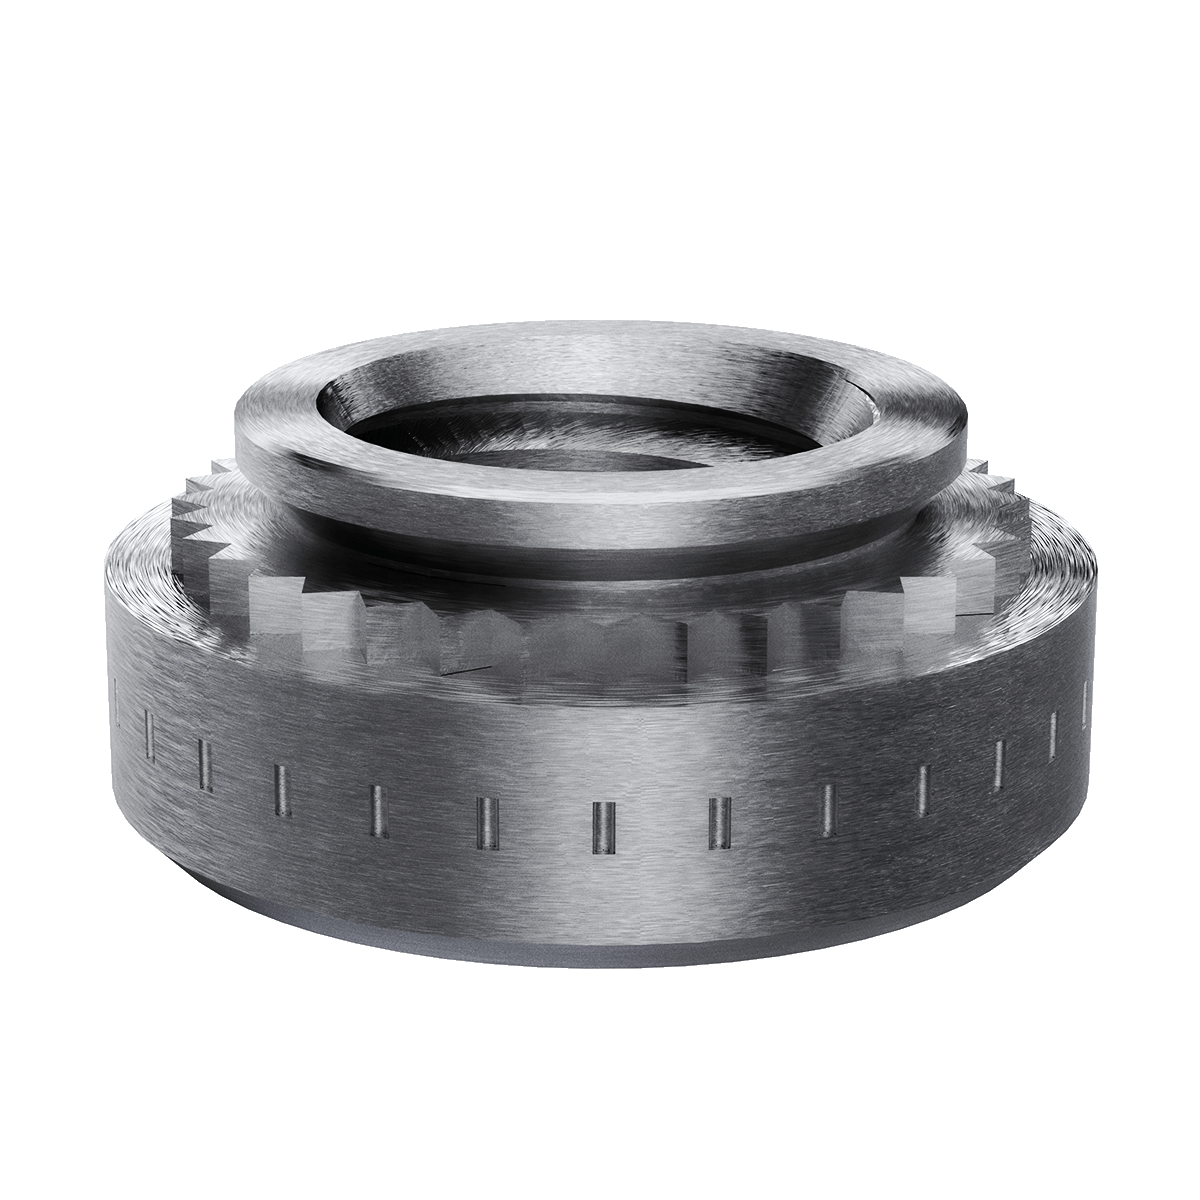 Self-Clinching Nut, For SS, 17-4 Stainless Steel, Passivated, 10-32 x 2, 100 Pack